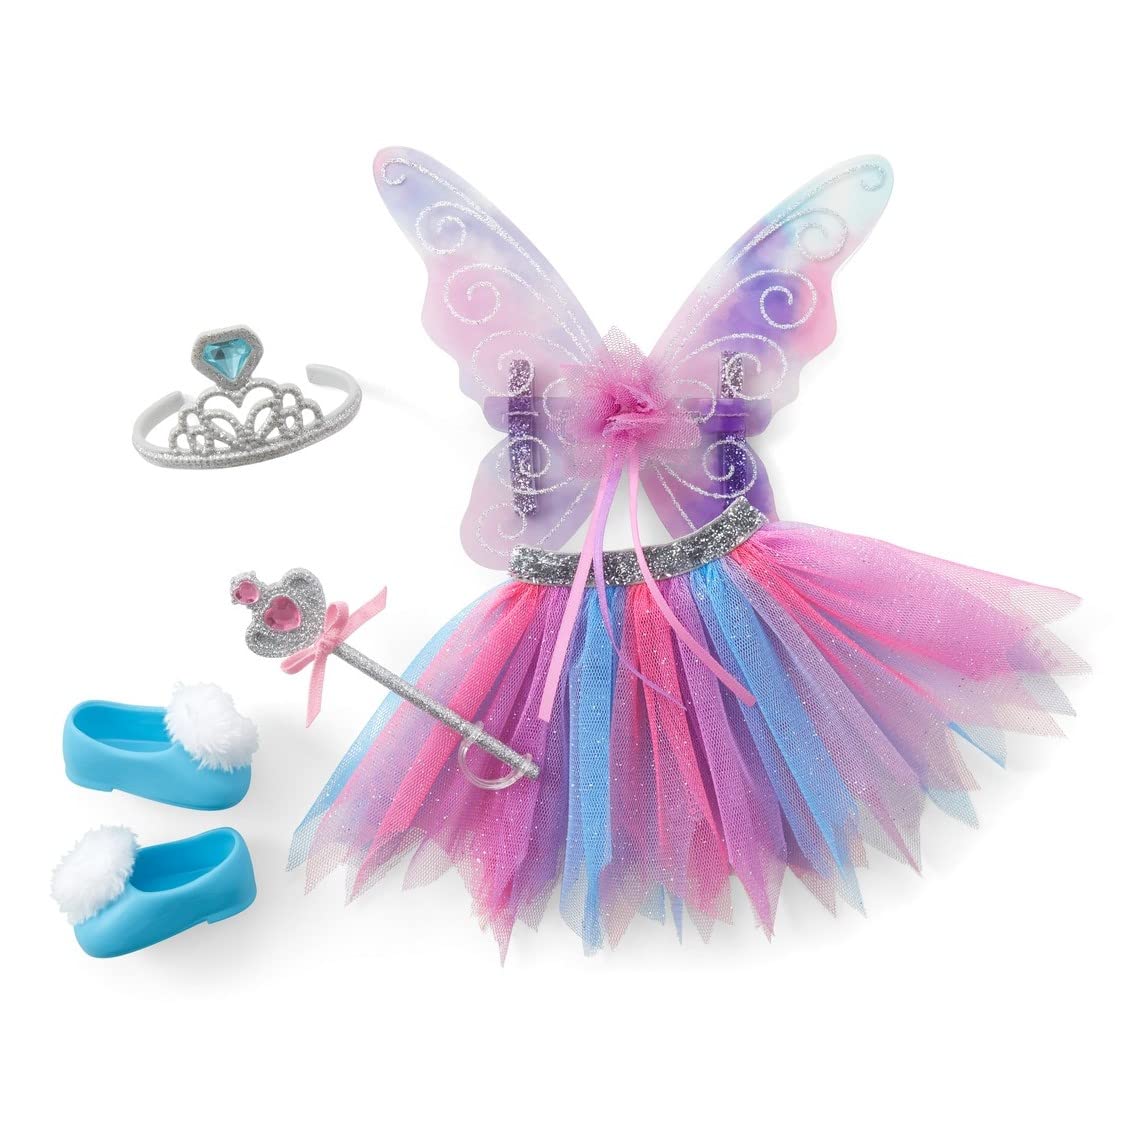 American Girl WellieWishers Colorful Butterfly Skirt & Wings Accessory Set for for 14.5-inch Dolls with a Multicolored Mesh Tutu, a Pair of Translucent Fairy Wings, Sparkly Silver Crown, Ages 4+